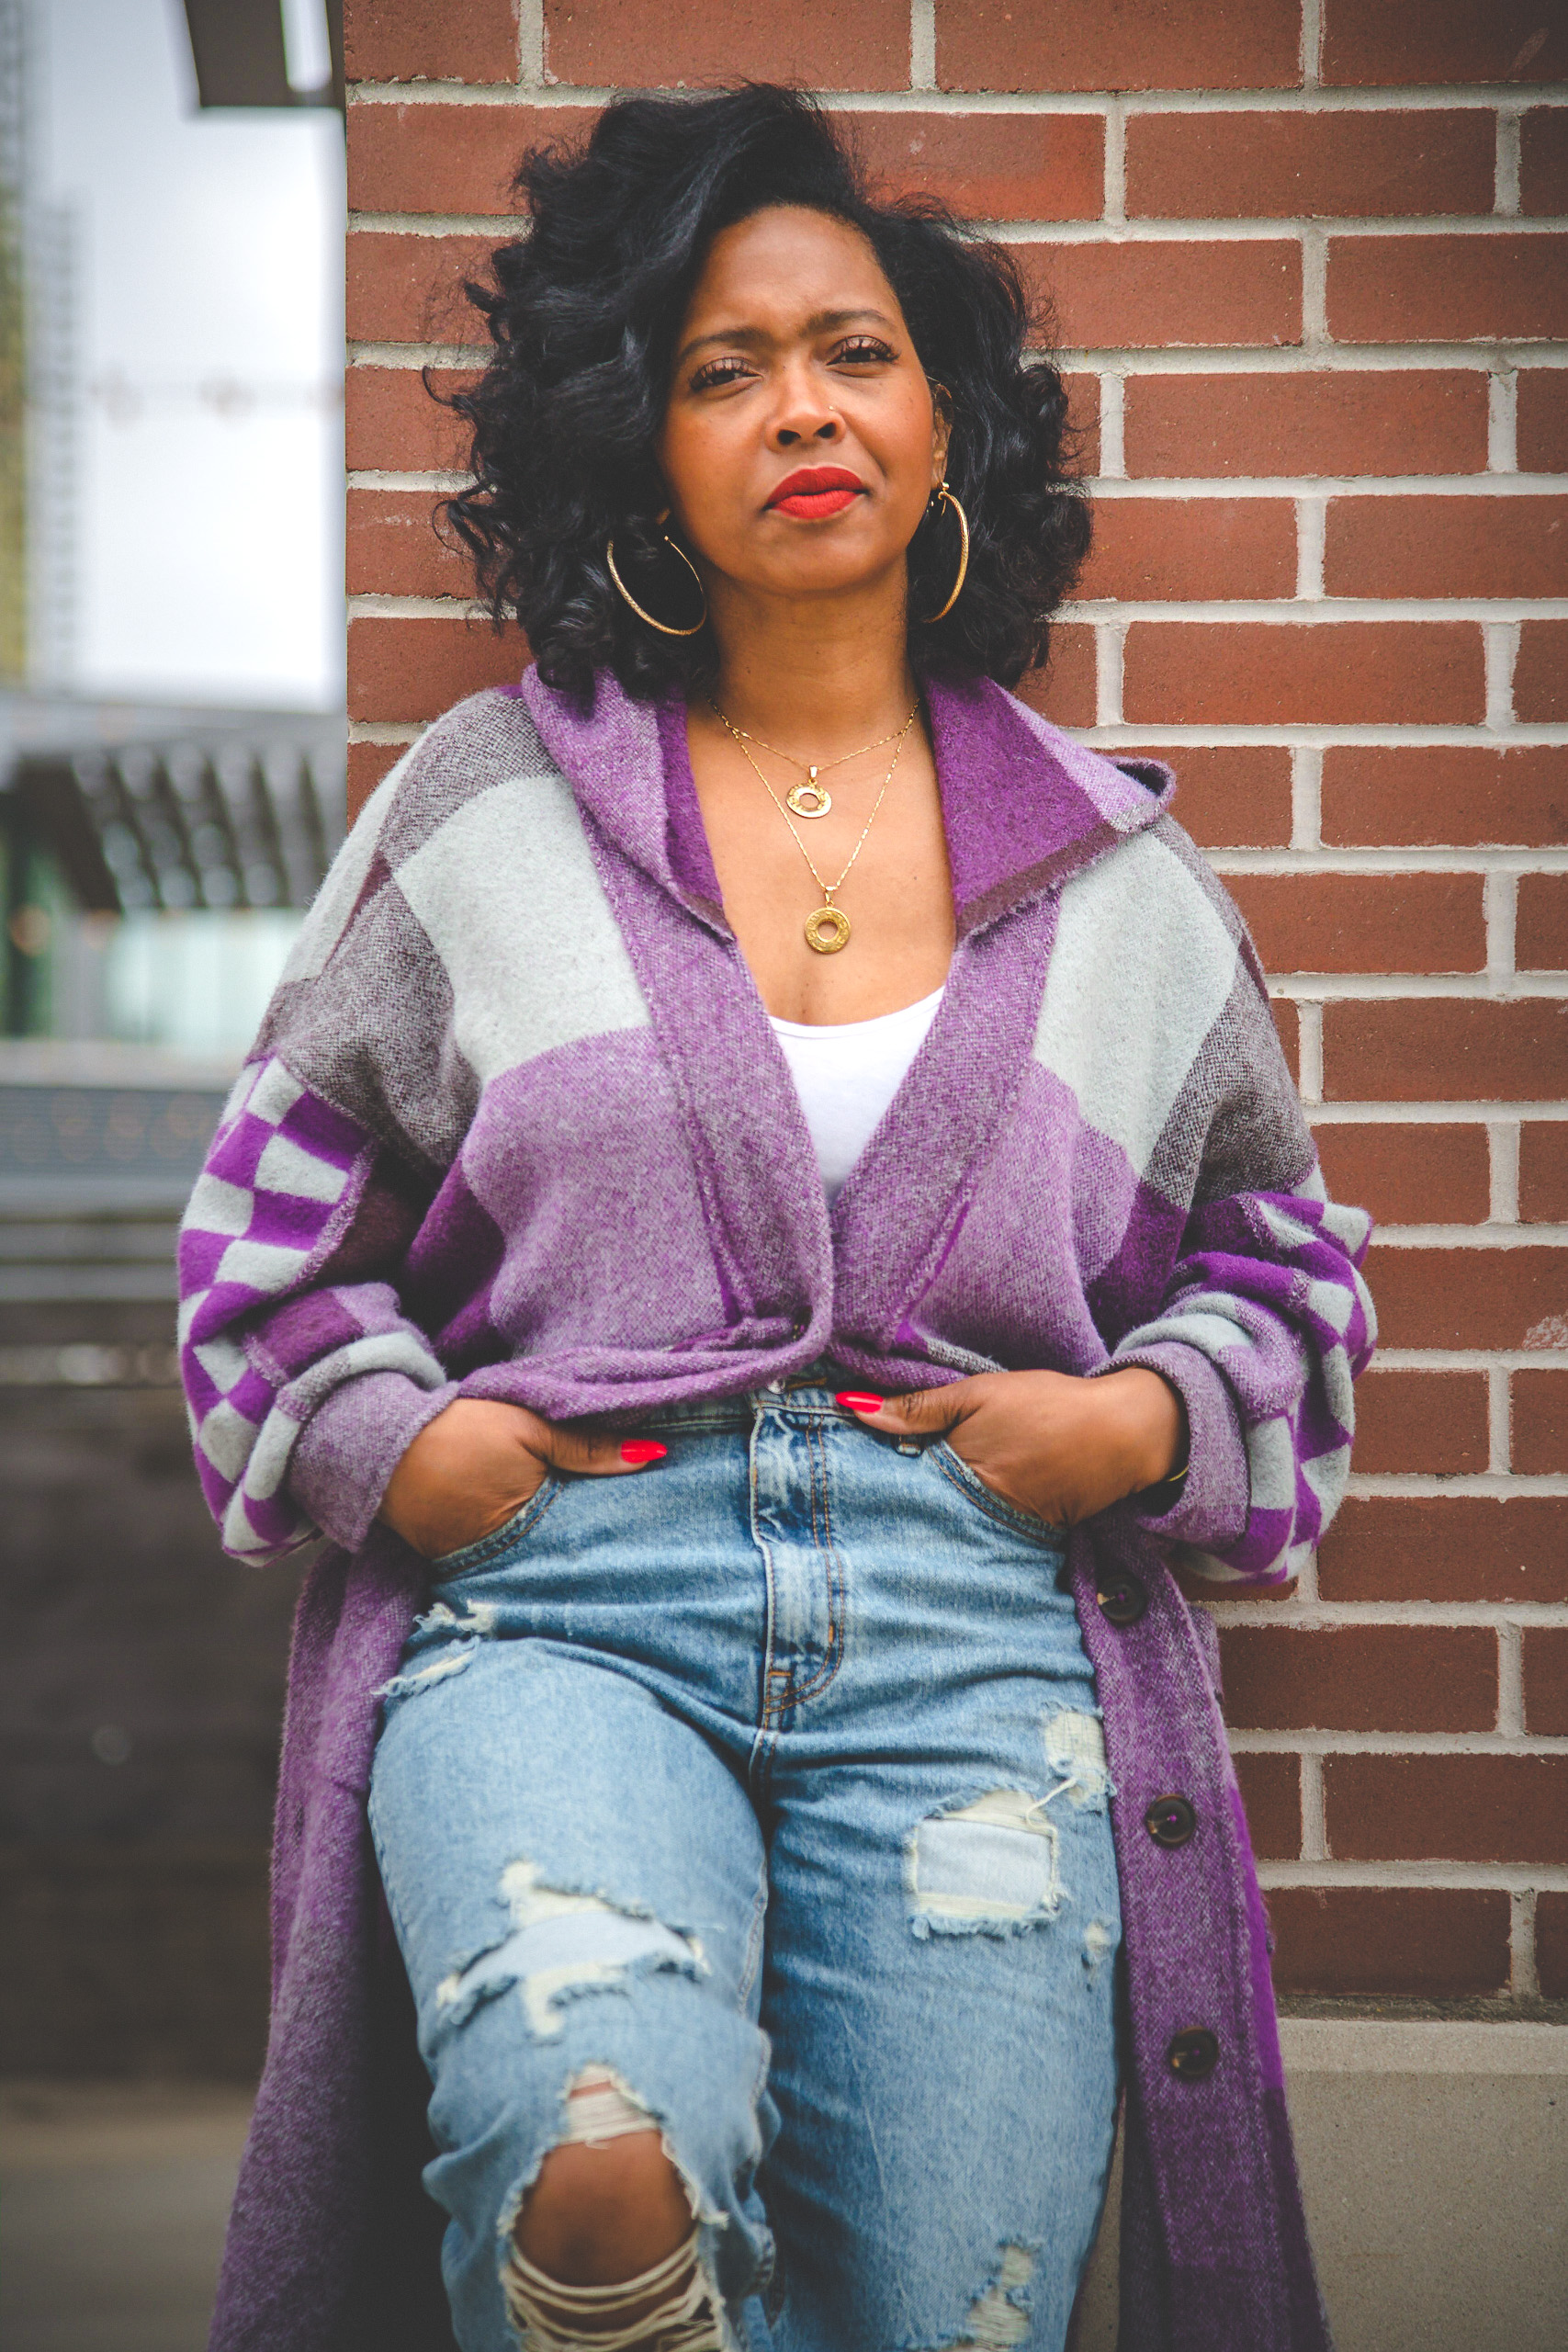 SWEENEE STYLE, BLACK GIRLS WHO BLOG, NATURAL HAIR BLOGGER, INDIANAPOLIS STYLE BLOG, FREE PEOPLE STYLE, EASY OUTFIT IDEAS, SWEENEESTYLEBLOGGER